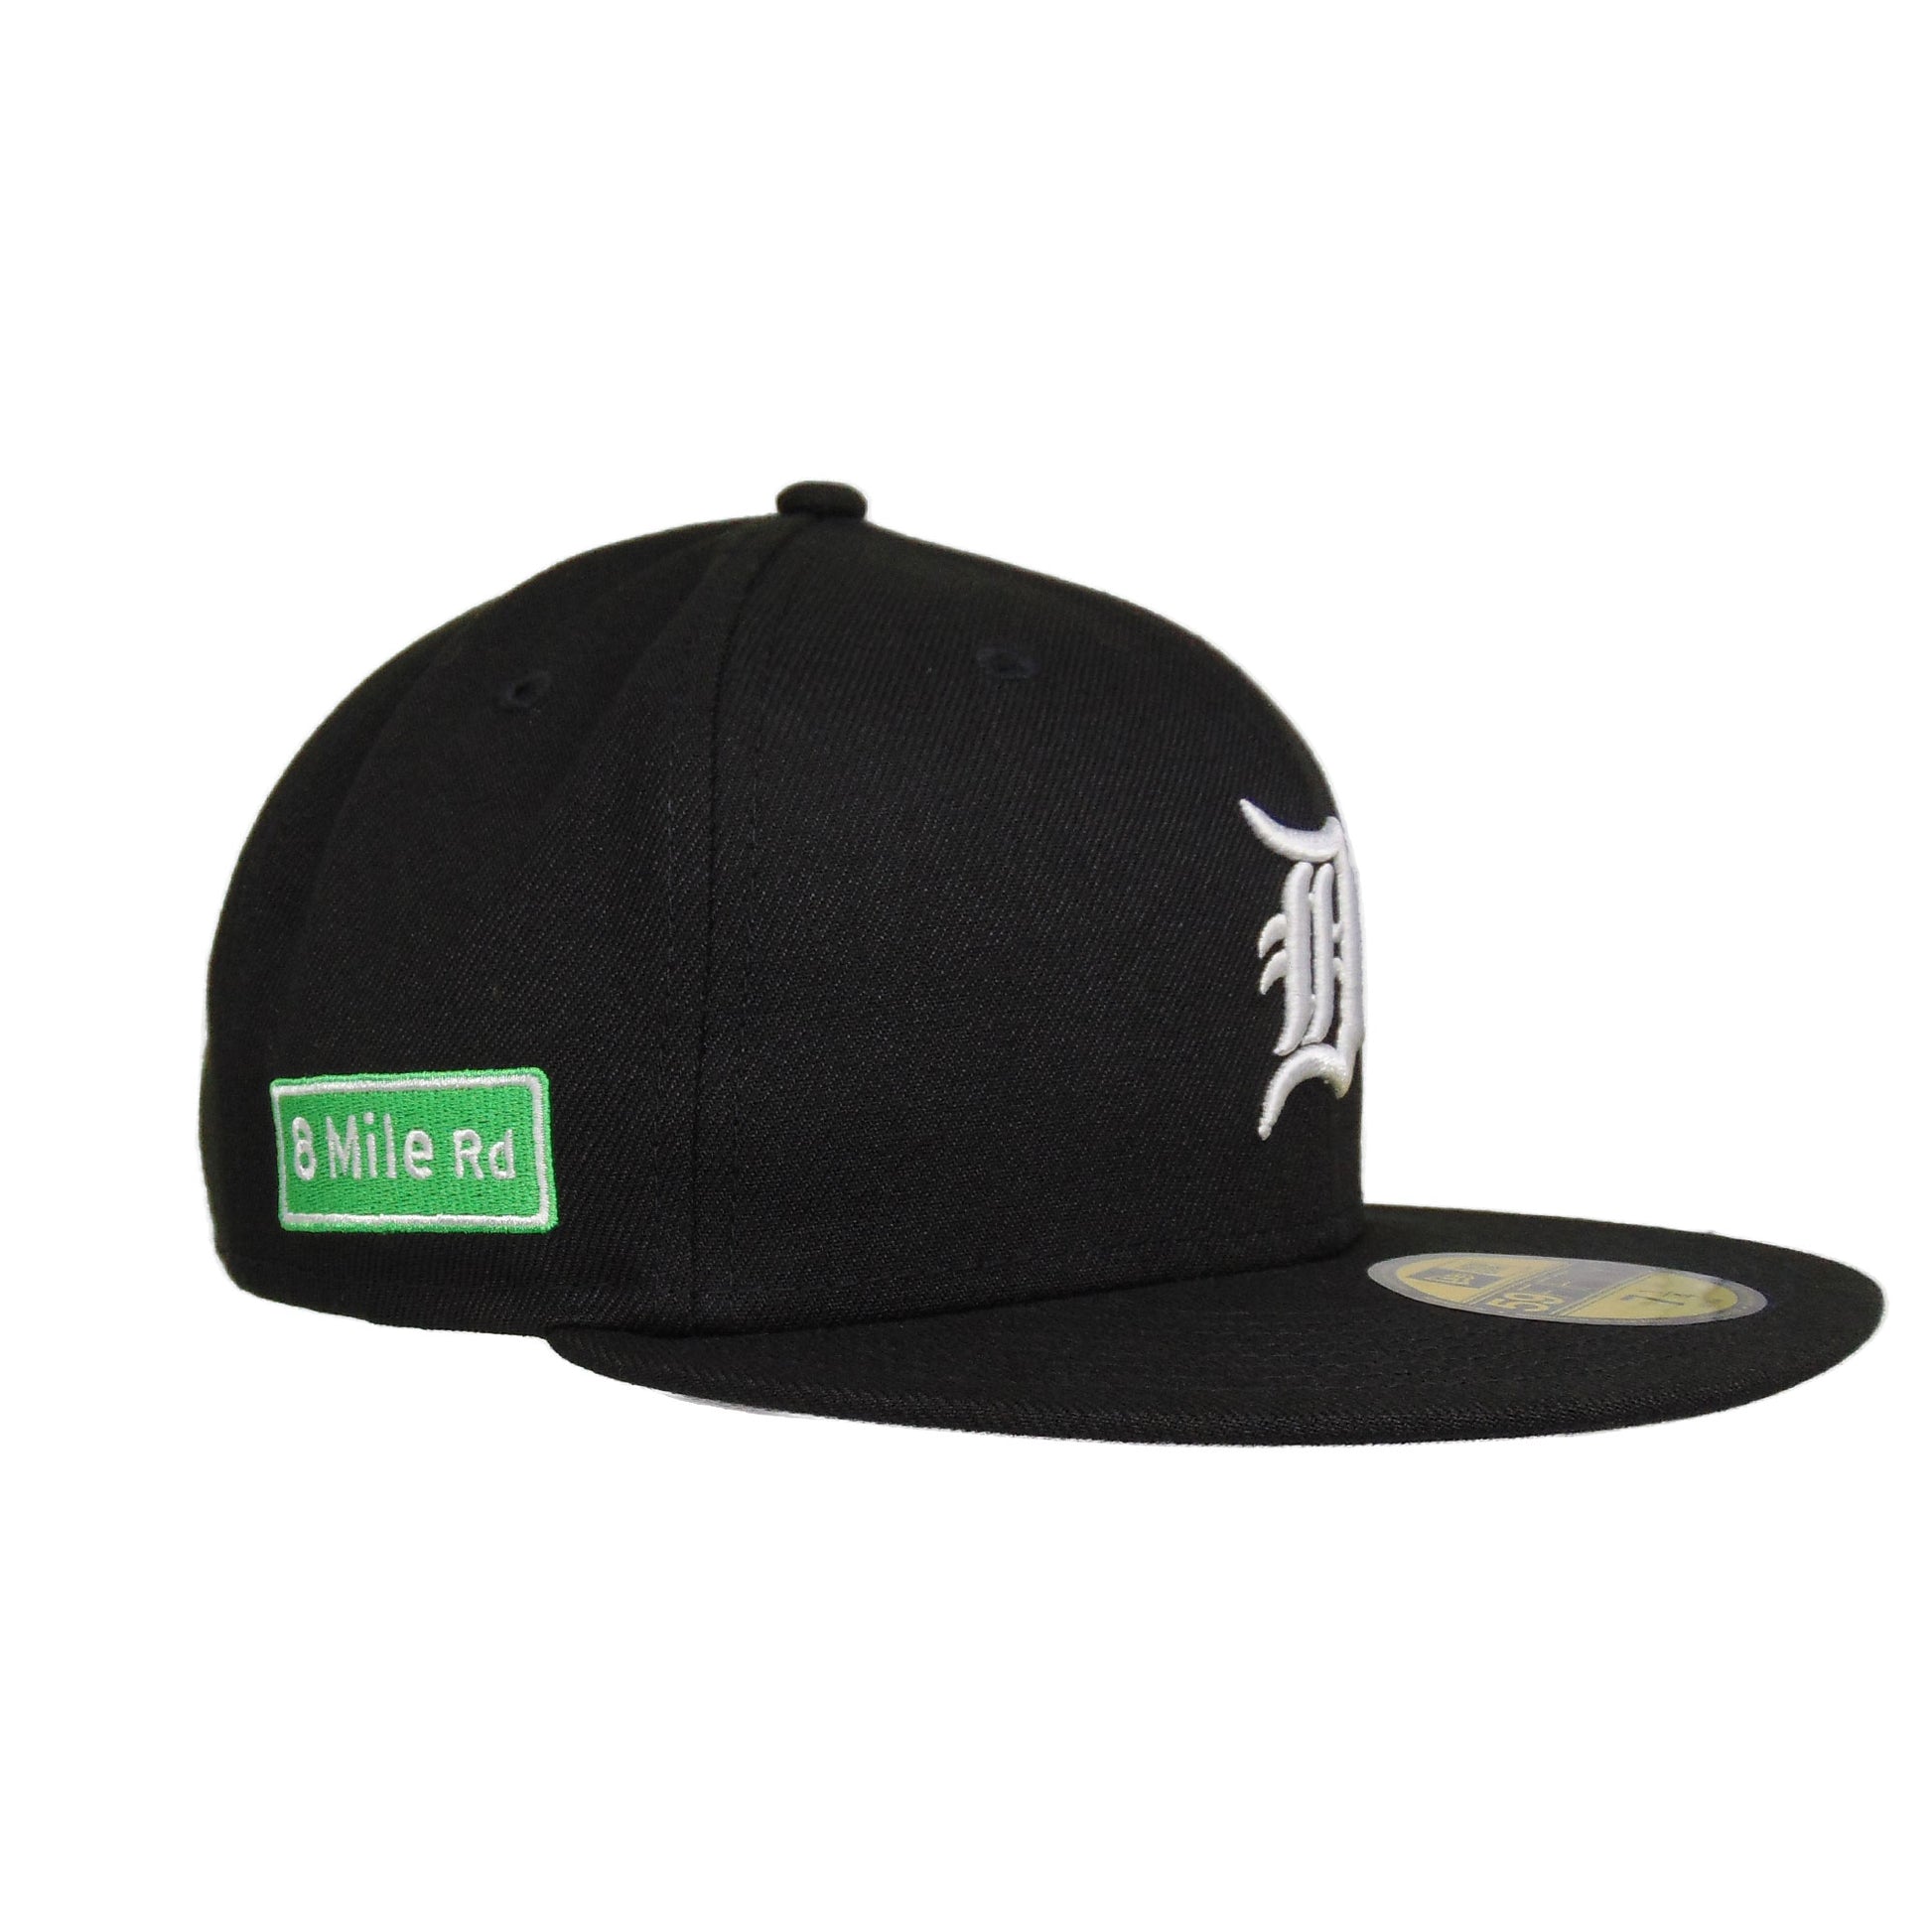 Detroit Tigers Custom New Era 59FIFTY Cap 8 MILE RD – JustFitteds